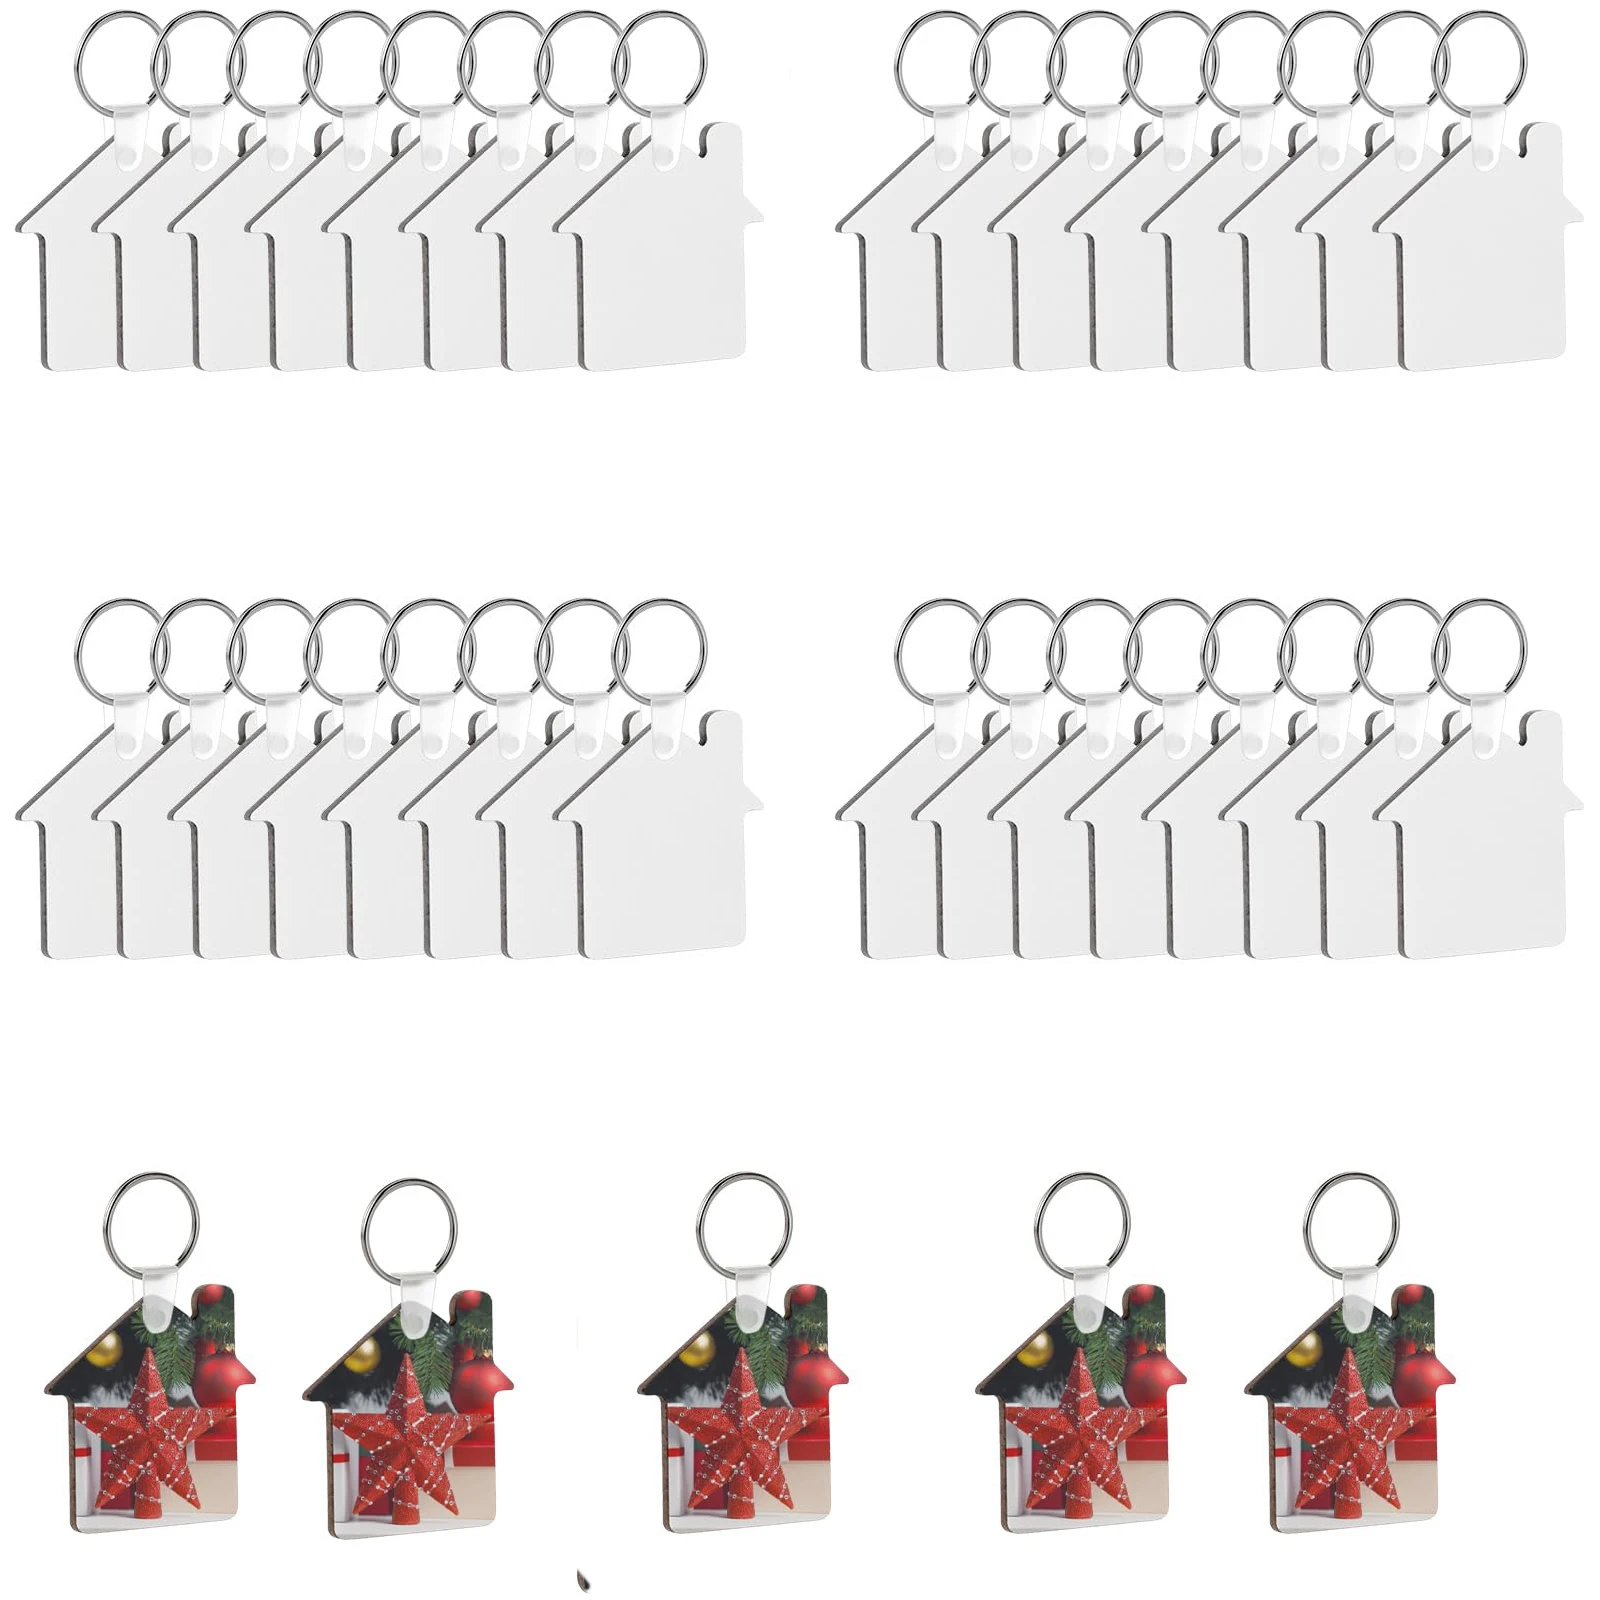 

10Pcs/Set Sublimation House Keychain Blanks House Key Chain With Keyrings Tags Heat Transfer Photo Gift DIY Crafting Making